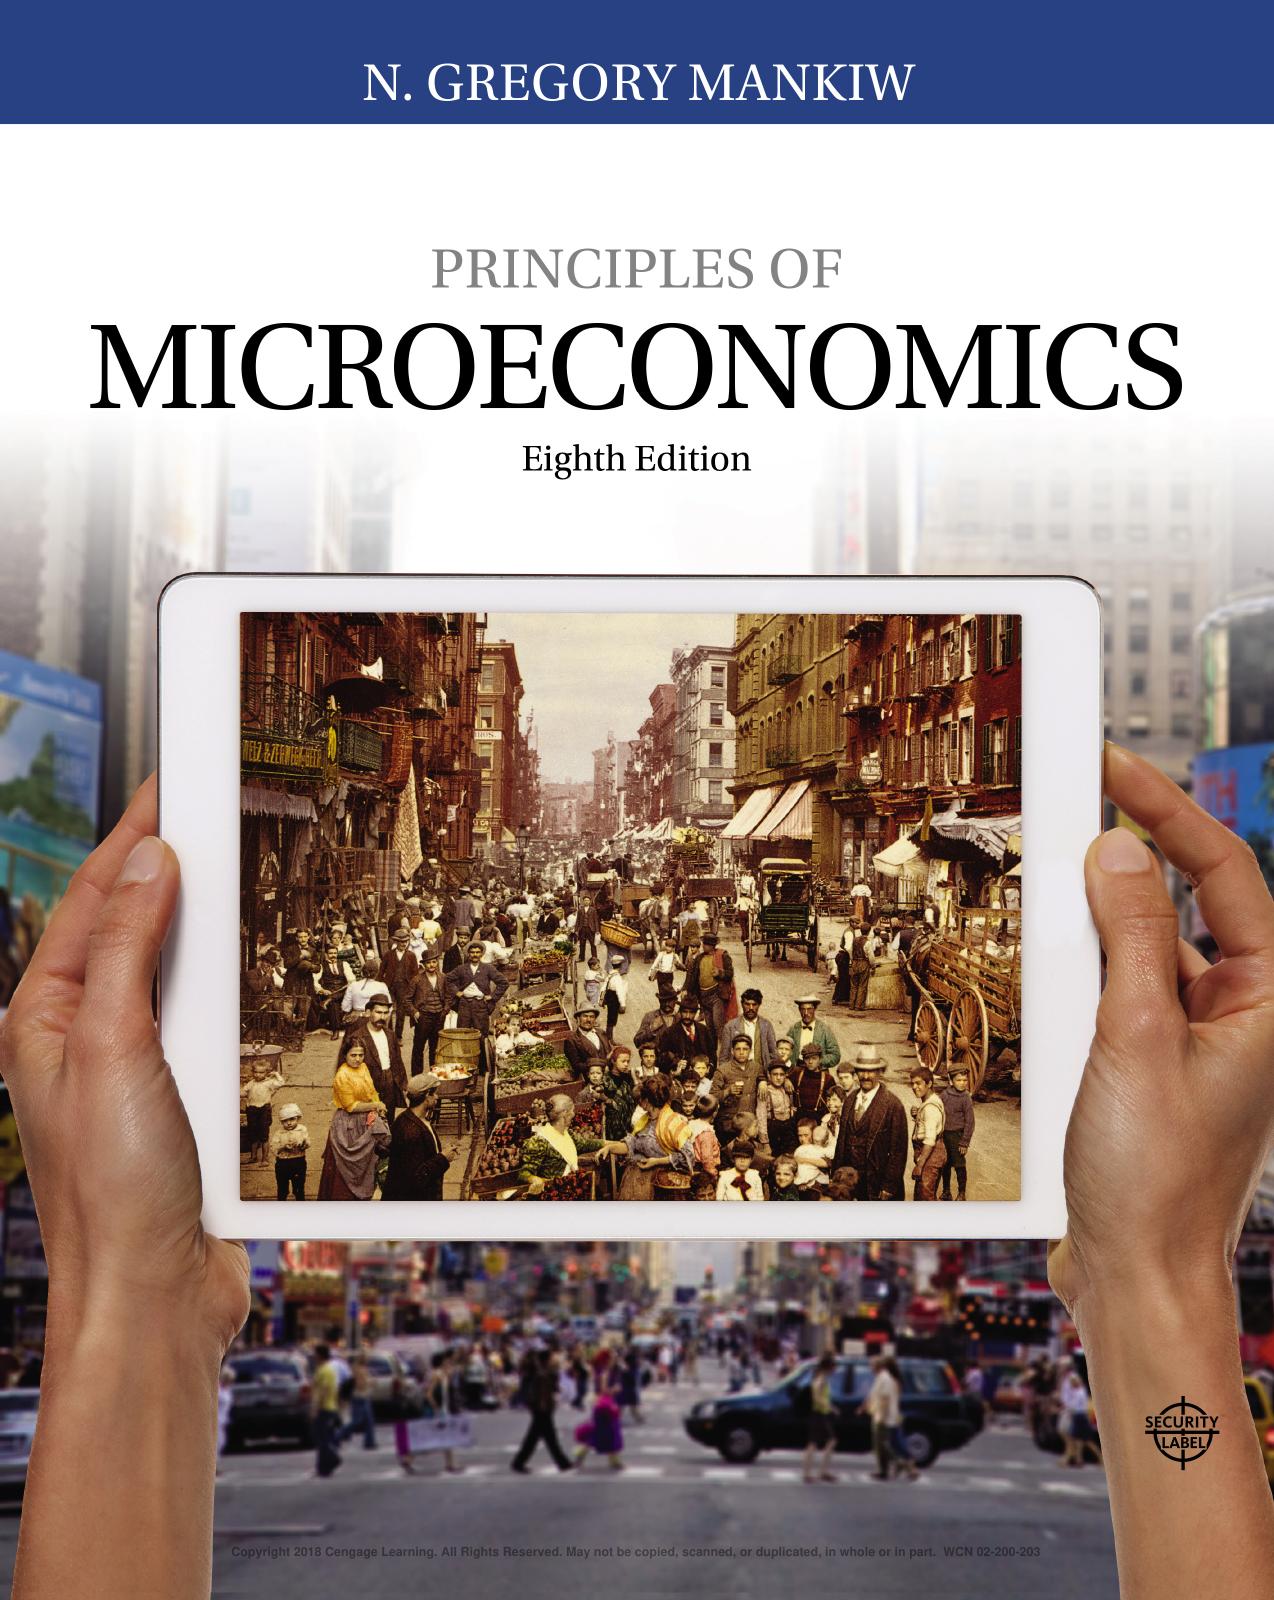 Principles of Microeconomics by N. Gregory Mankiw (z-lib.org) 8th ed 2018